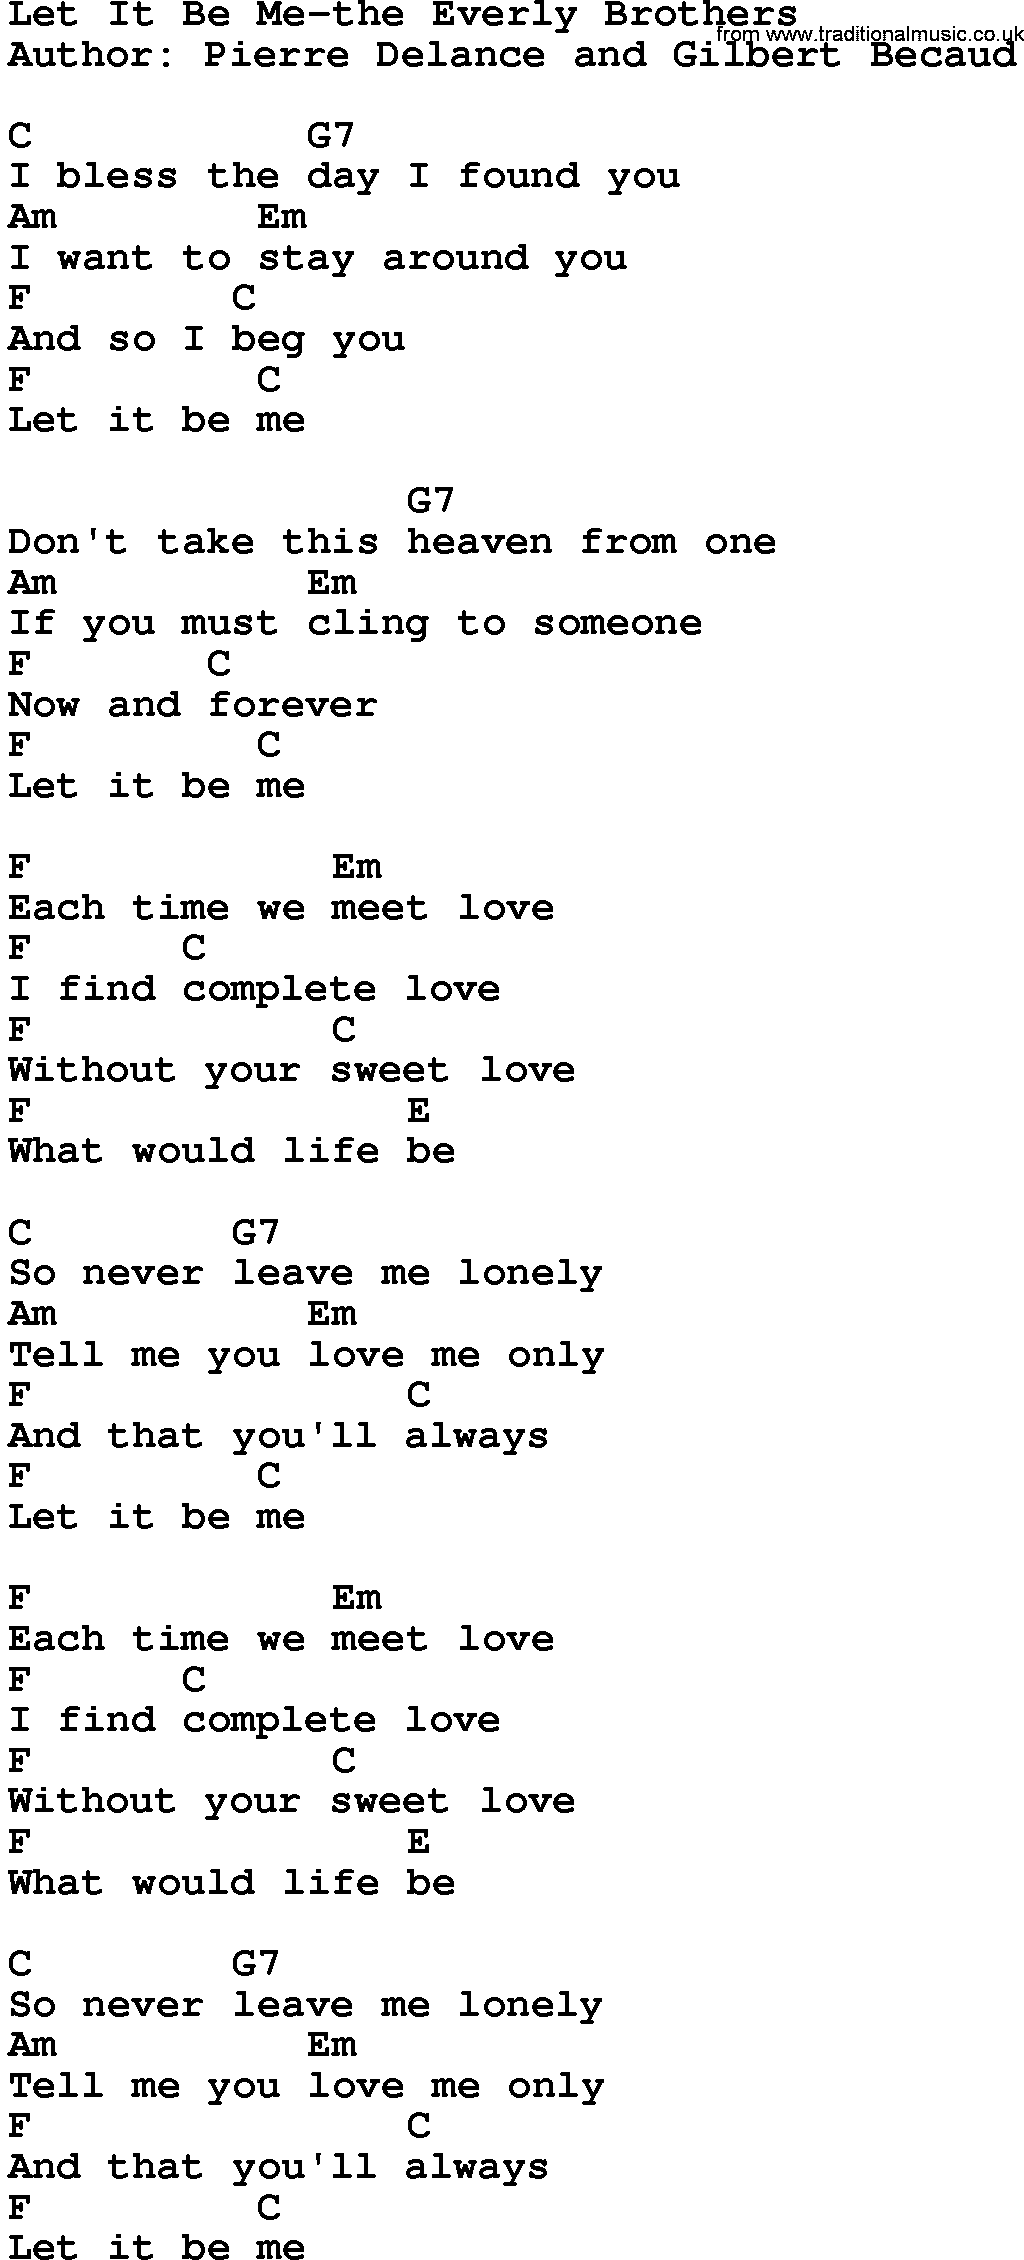 Country music song: Let It Be Me-The Everly Brothers lyrics and chords